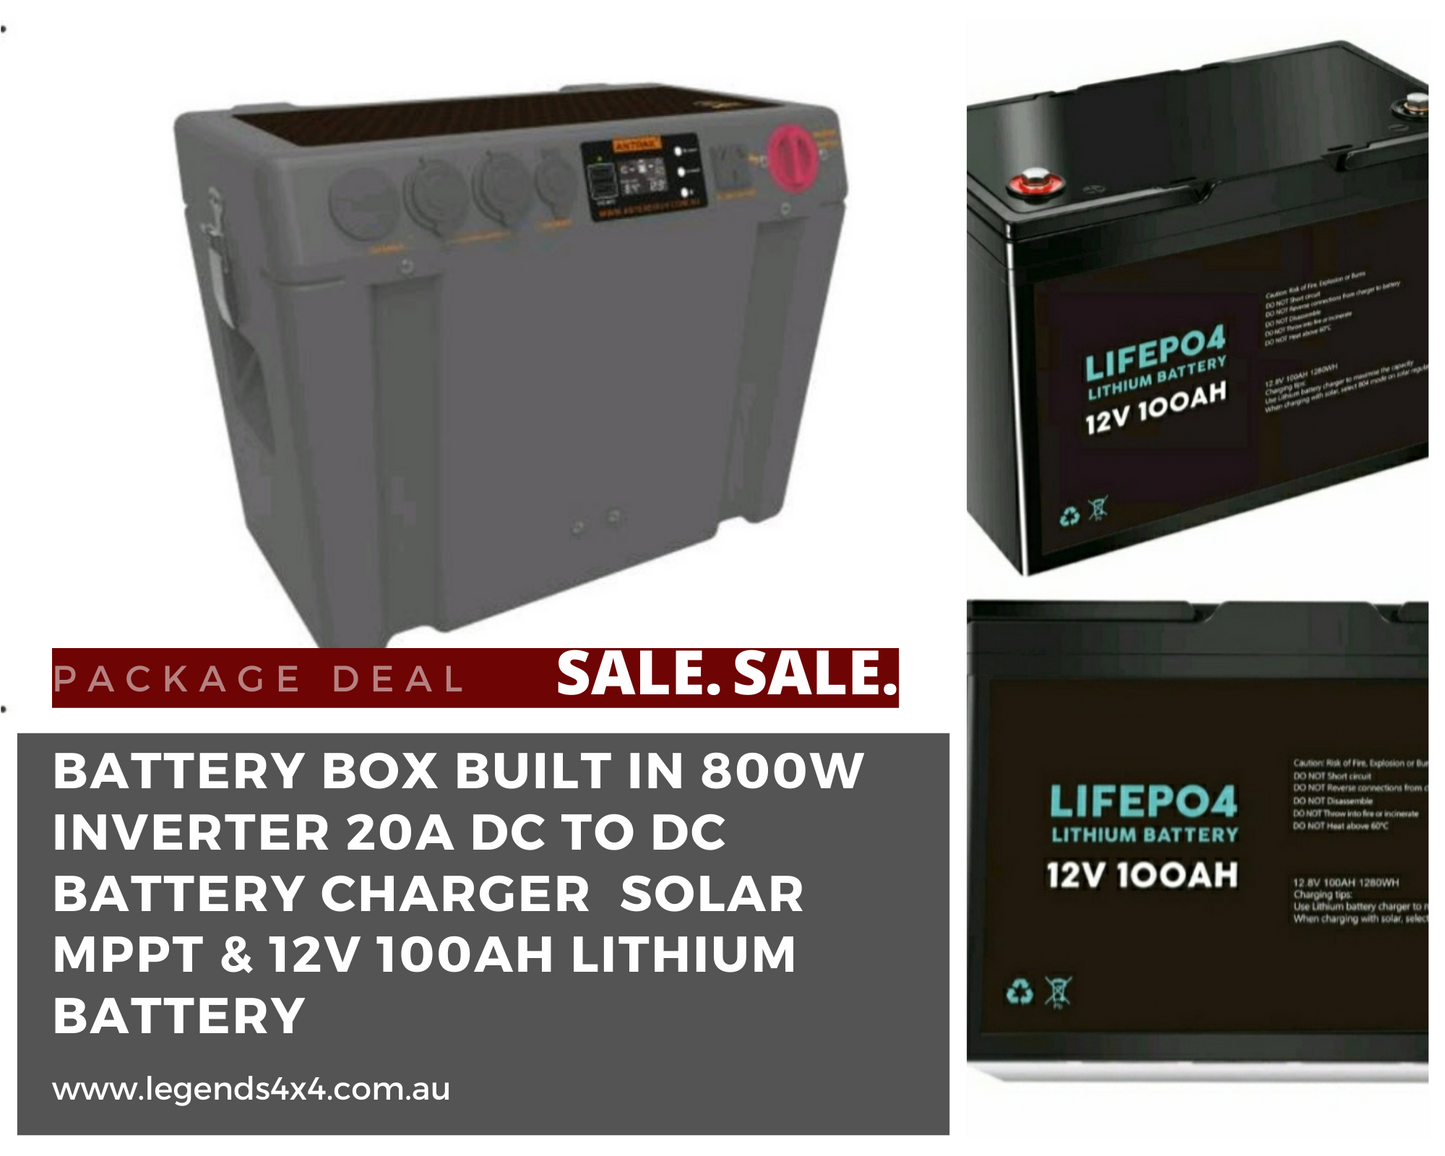 BATTERY BOX DUAL BATTERY SYSTEM 800w INVERTER 20a DcDC SOLAR 100ah lithium Battery